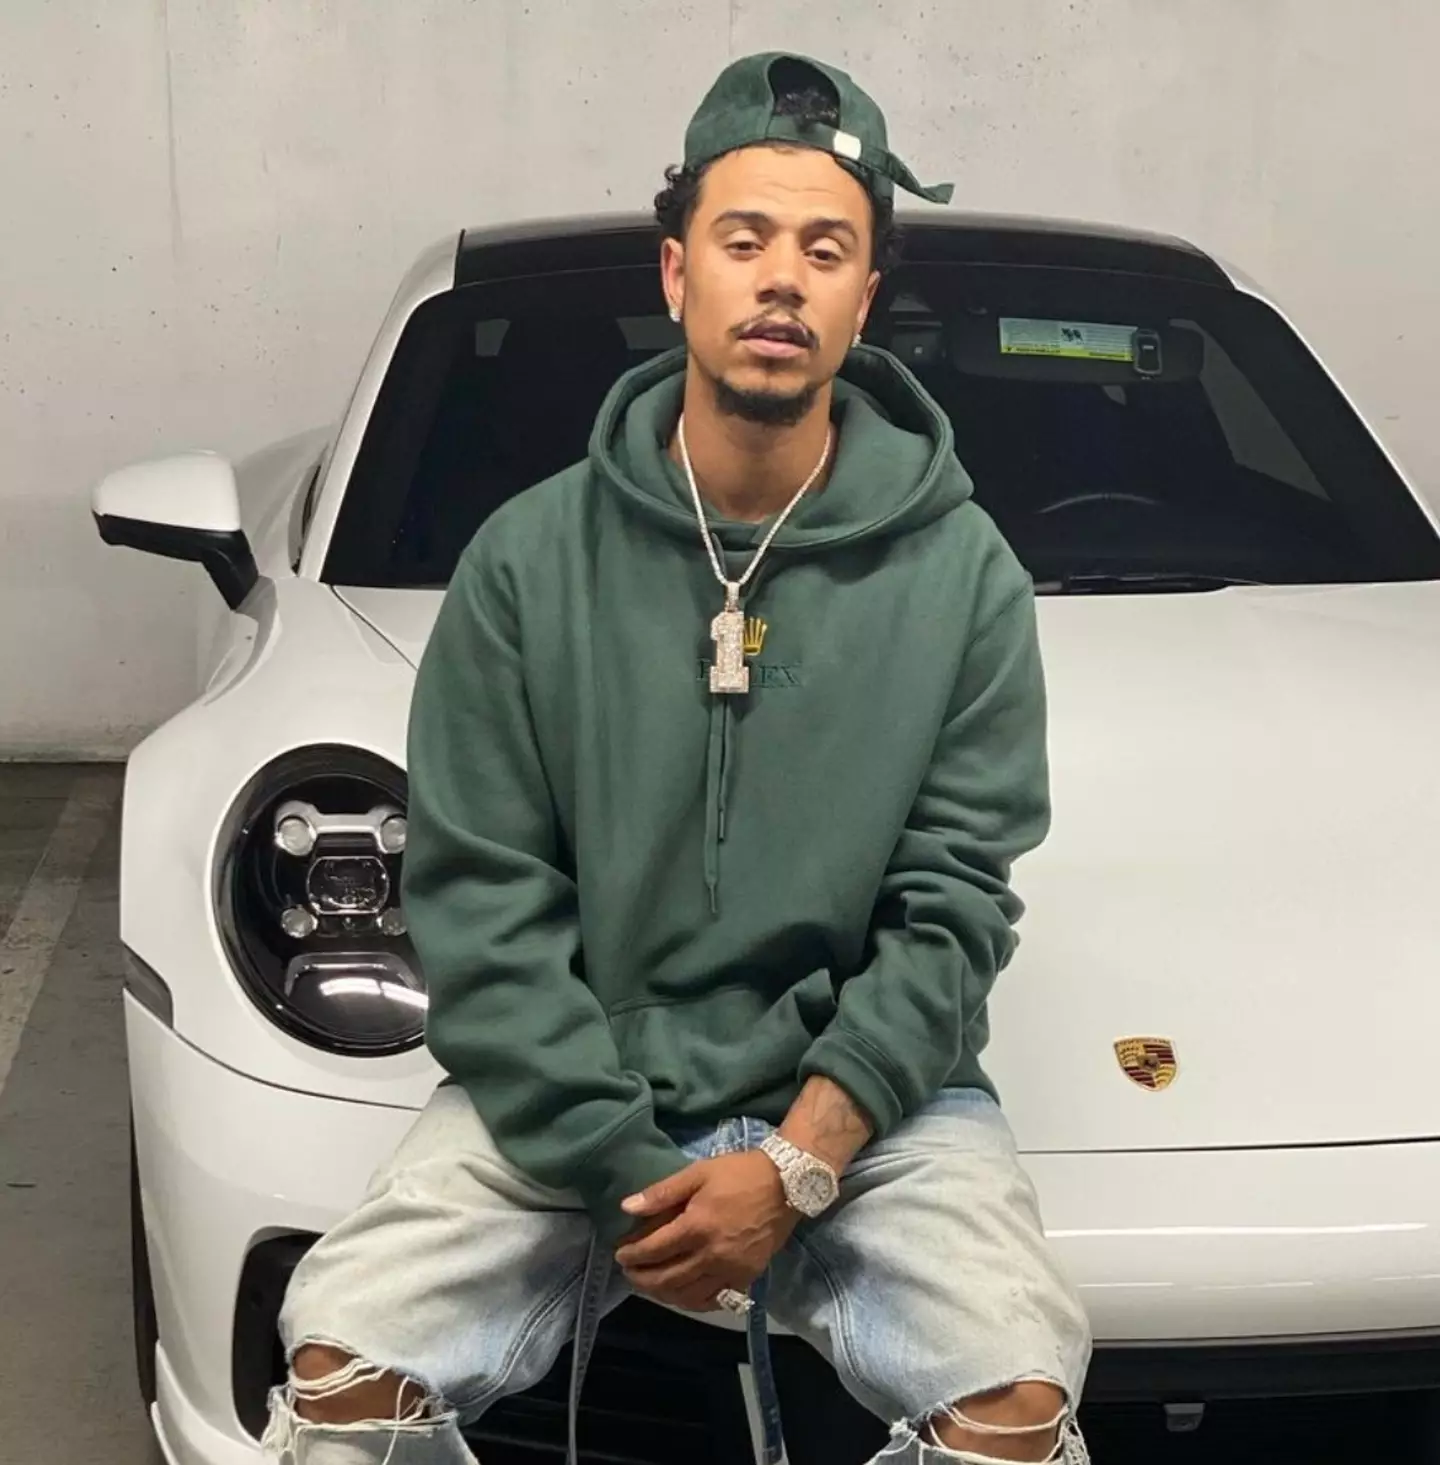 Photos and a video allegedly of Lil Fizz were posted online.